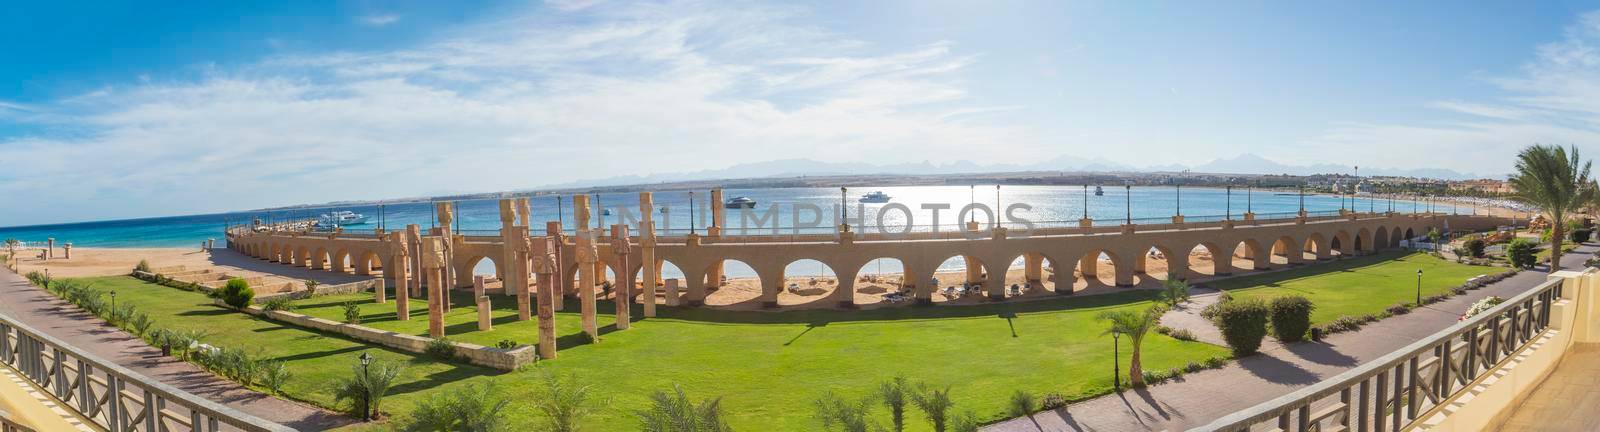 View across a beautiful landscaped garden to the sea in tropical resort with large bridge and archways on beach